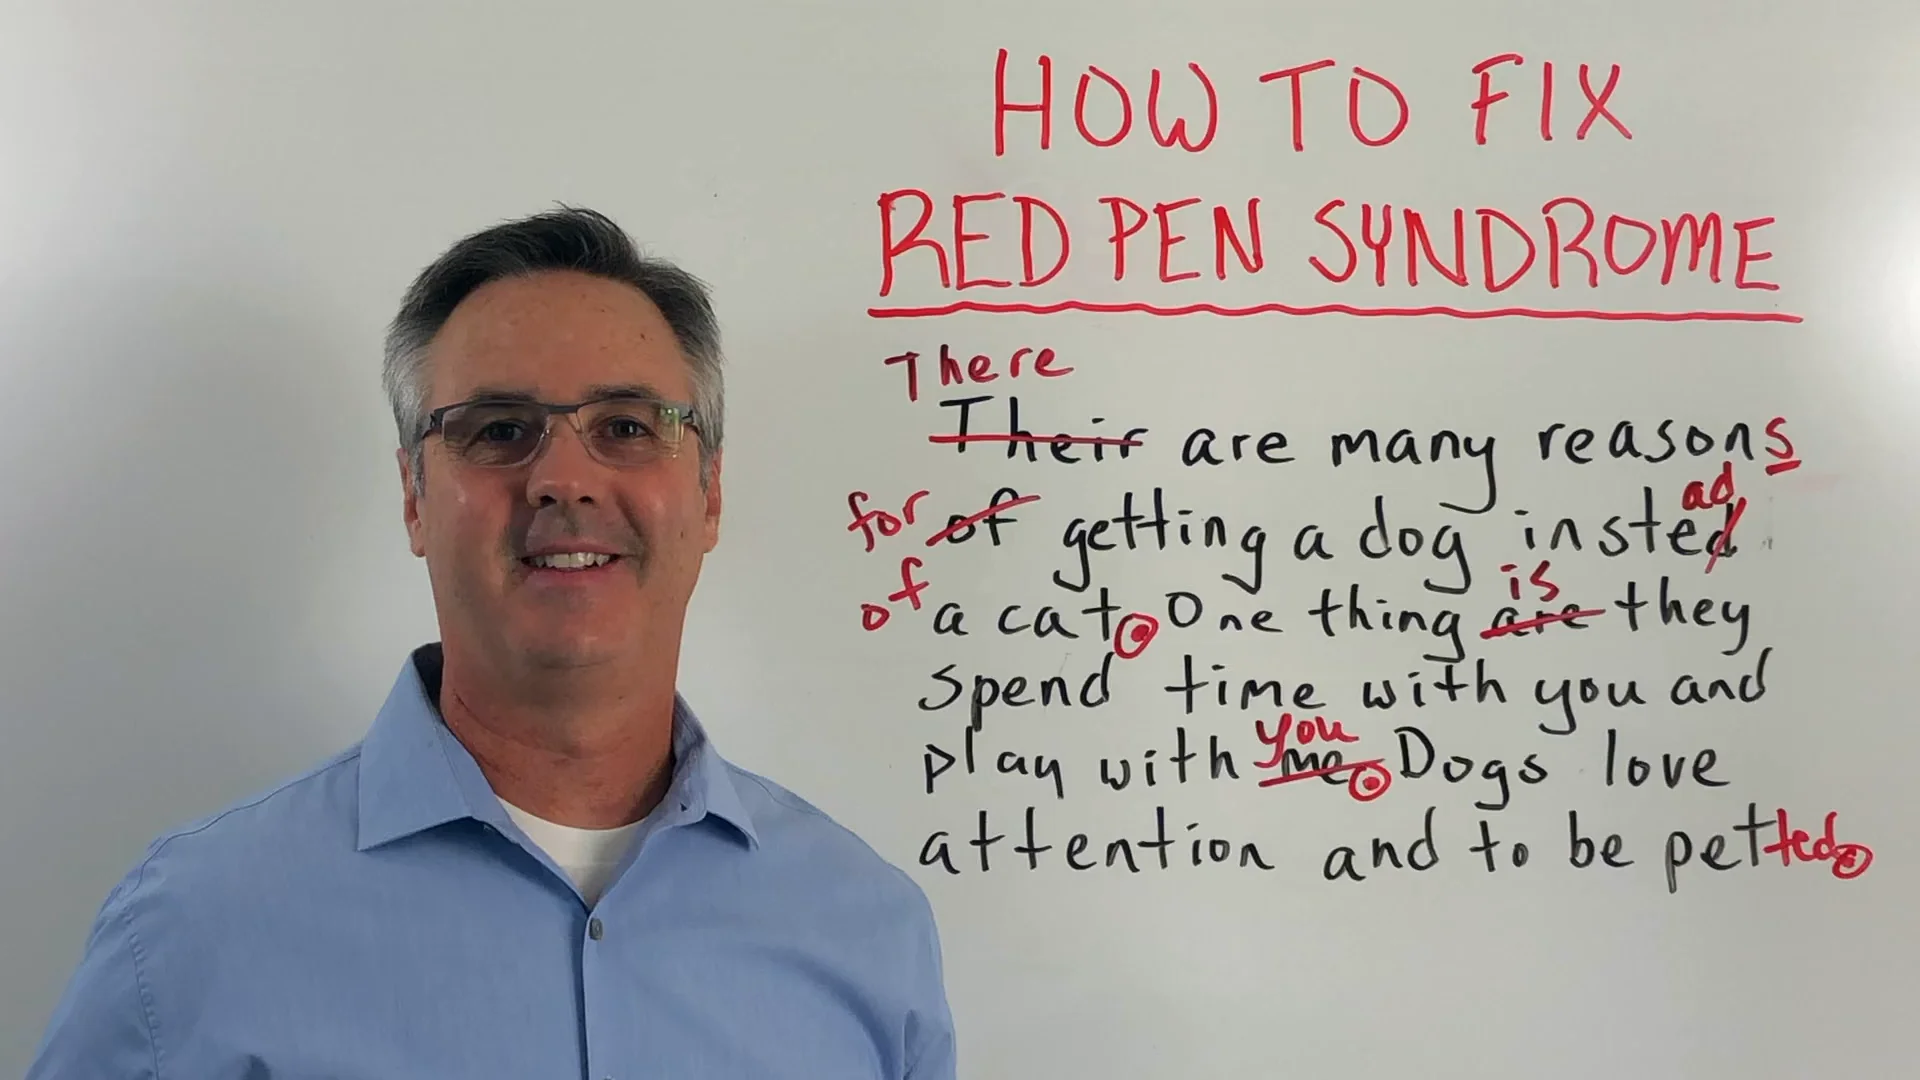 Red Pen Syndrome. Red Pen Syndrome, by Dries van den Enden